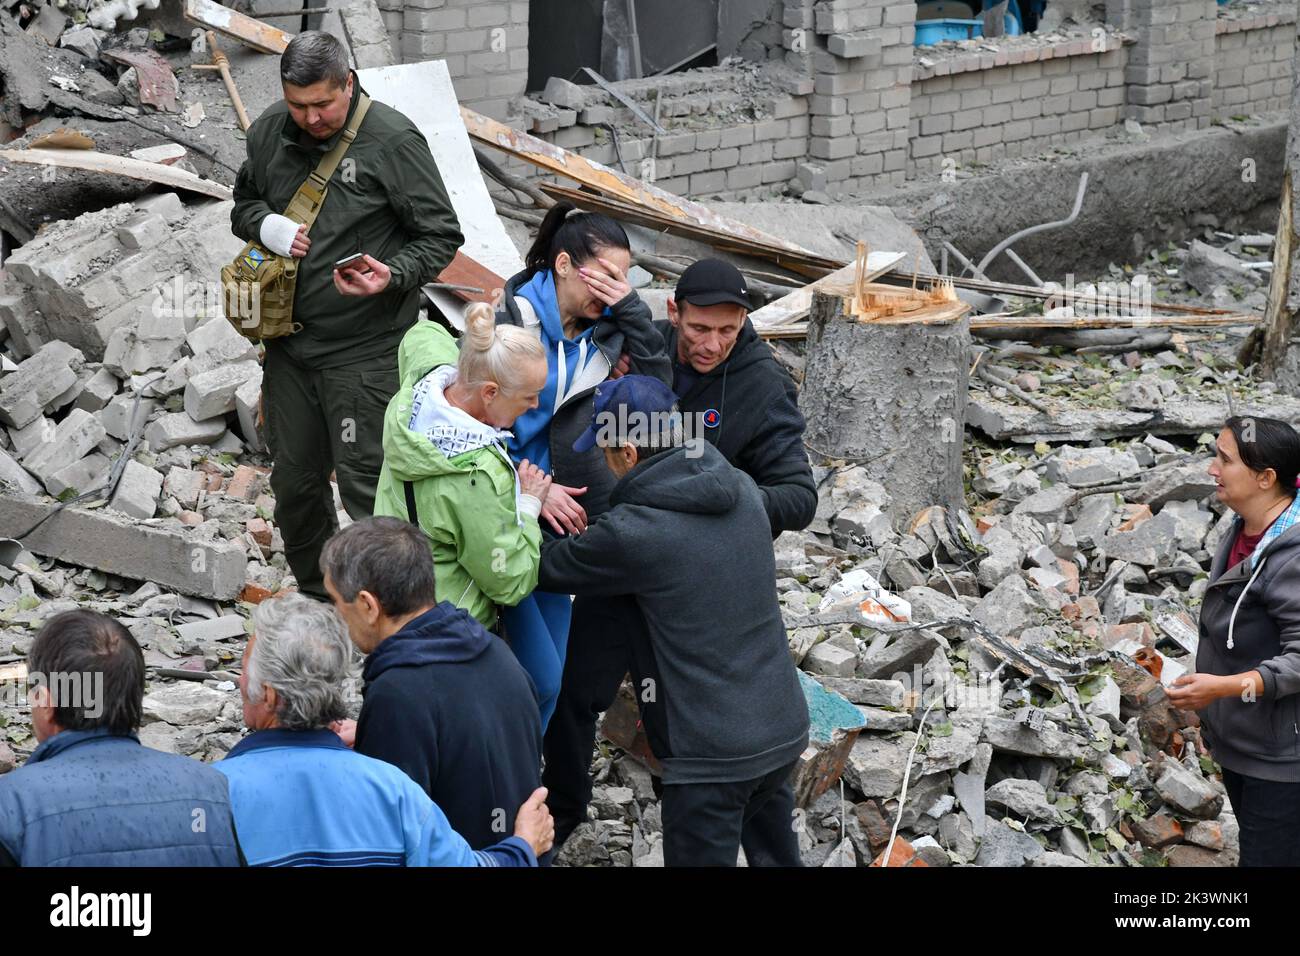 Relatives and friends comfort a woman after rescue workers found a body of a person under the debris following a Russian attack that heavily damaged a high school in Mykolaivka. Dmitry Peskov, press secretary of the Russian President, has stated that Russia will continue the war even after sham referendums are conducted, and it will aim to occupy the entire territory of Donetsk Oblast. Stock Photo